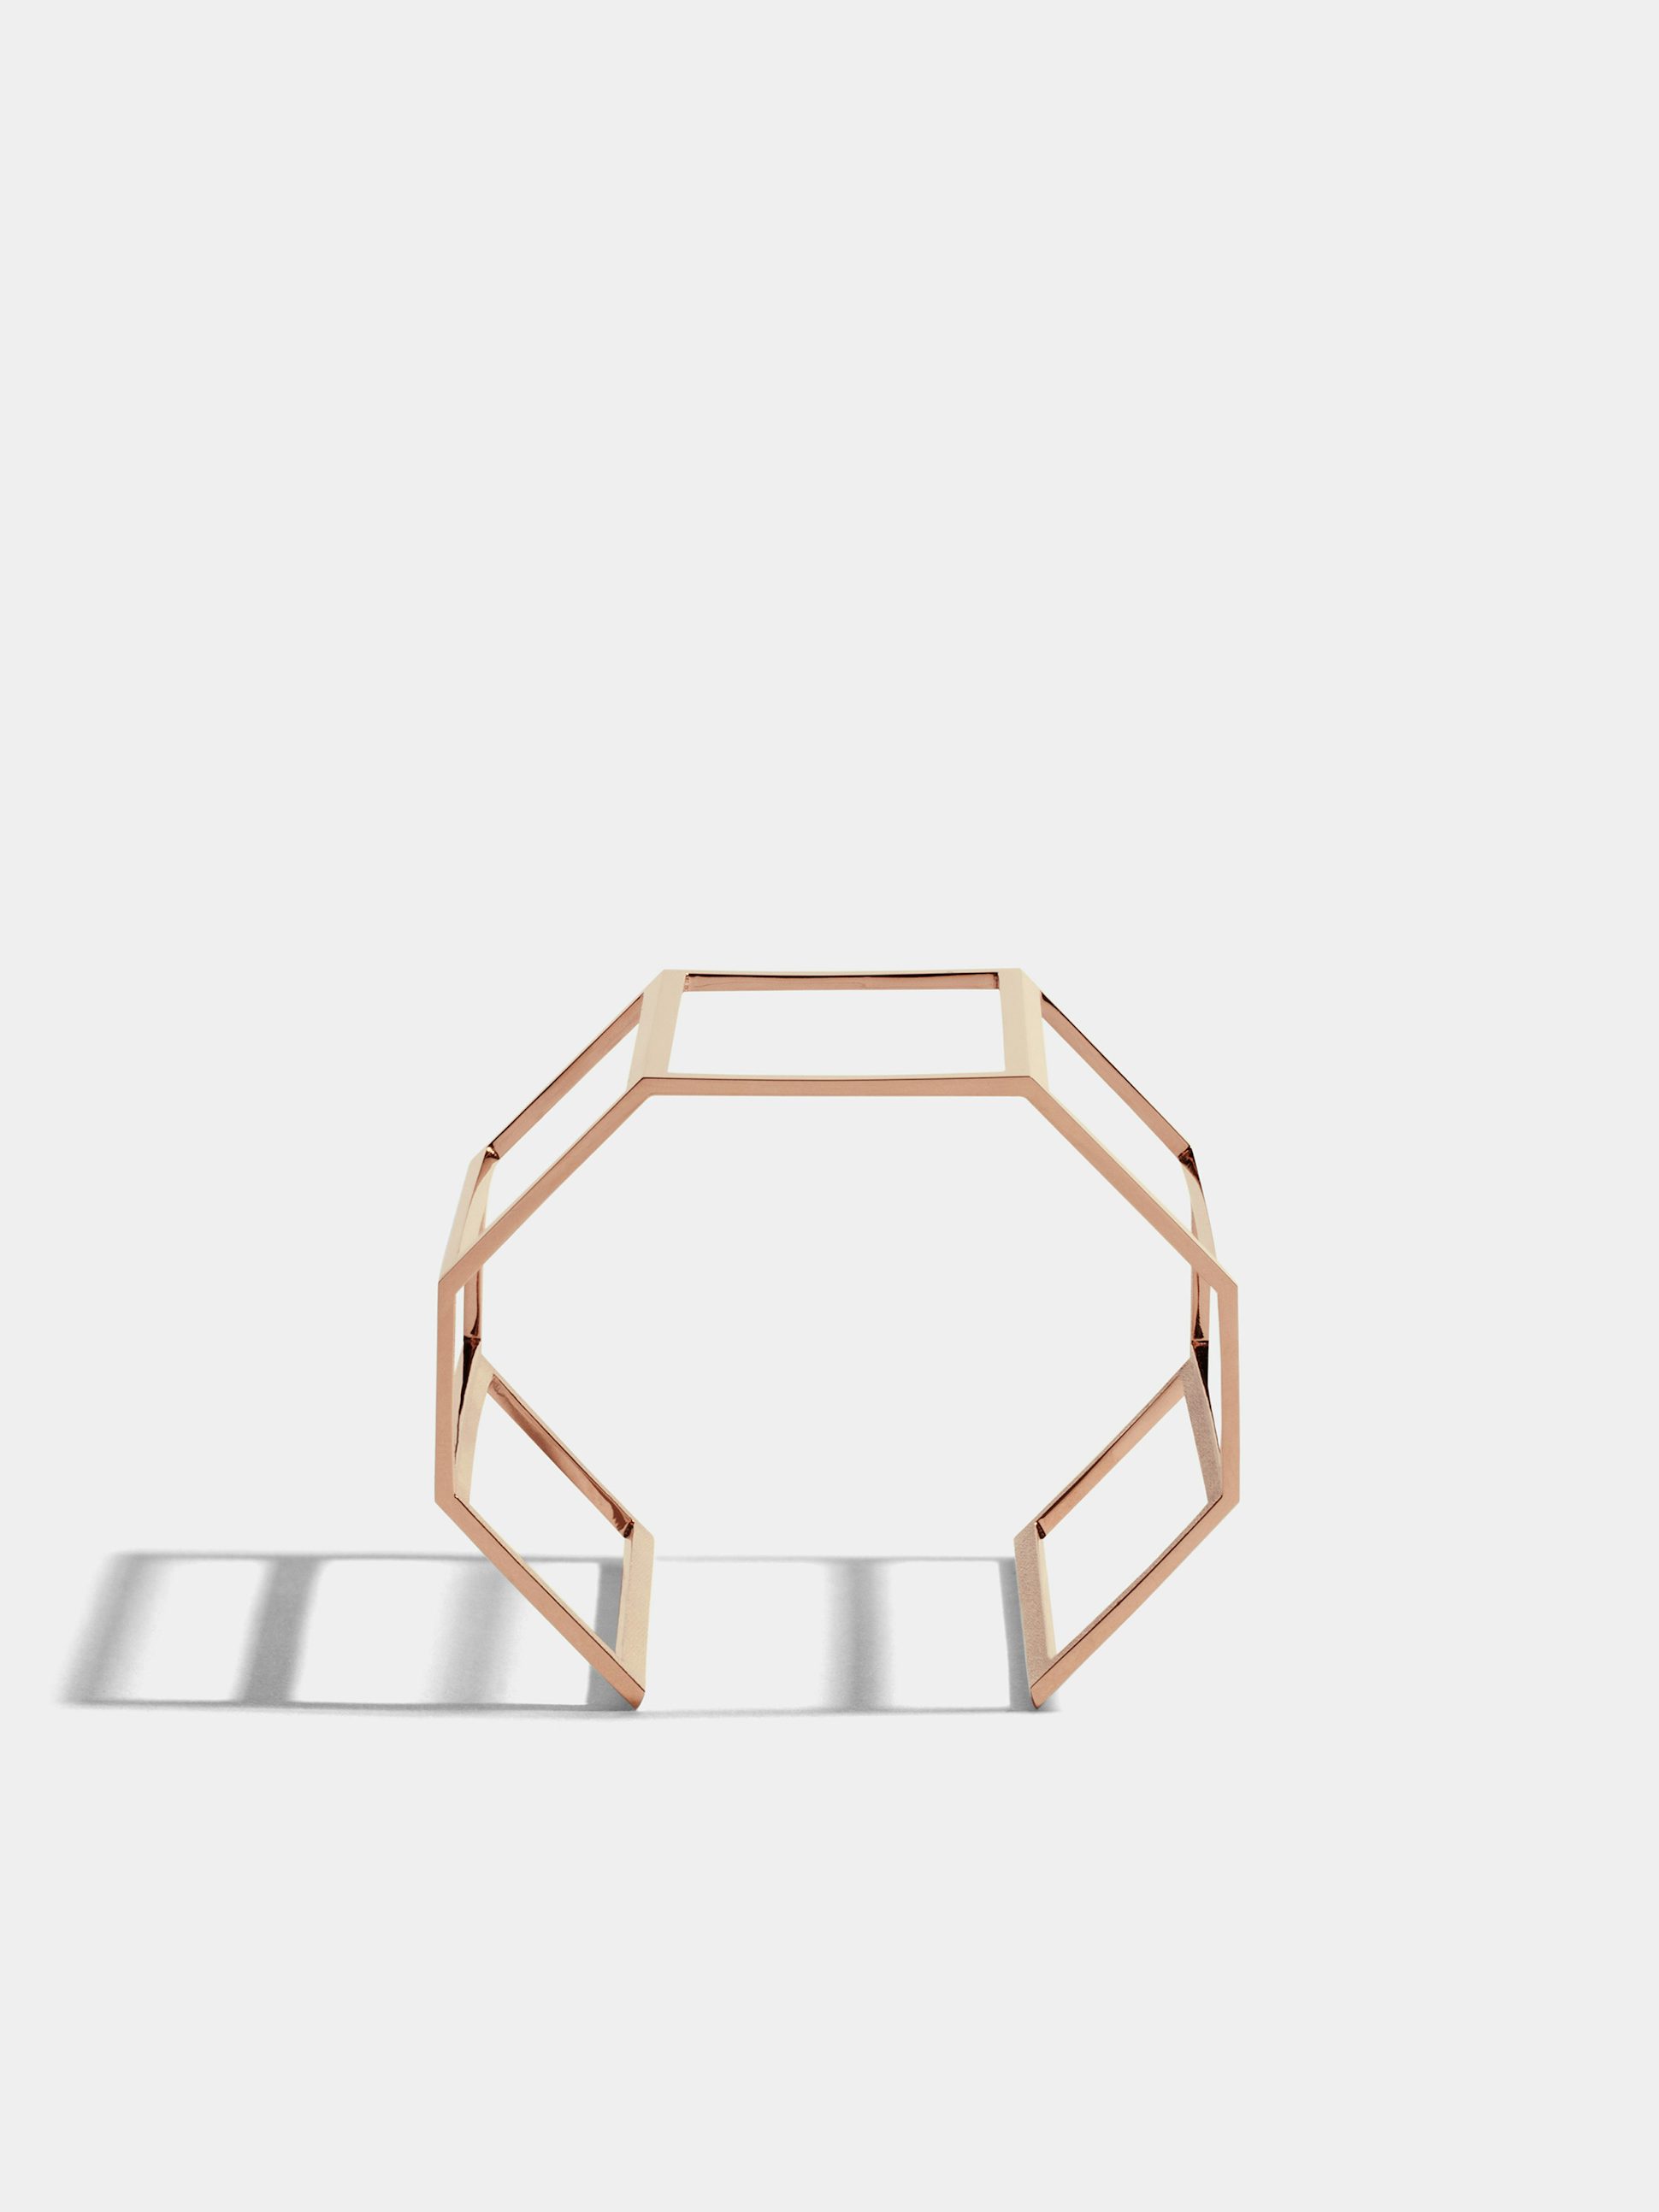 Octogone cuff in 18k Fairmined ethical rose gold (60mm wide)